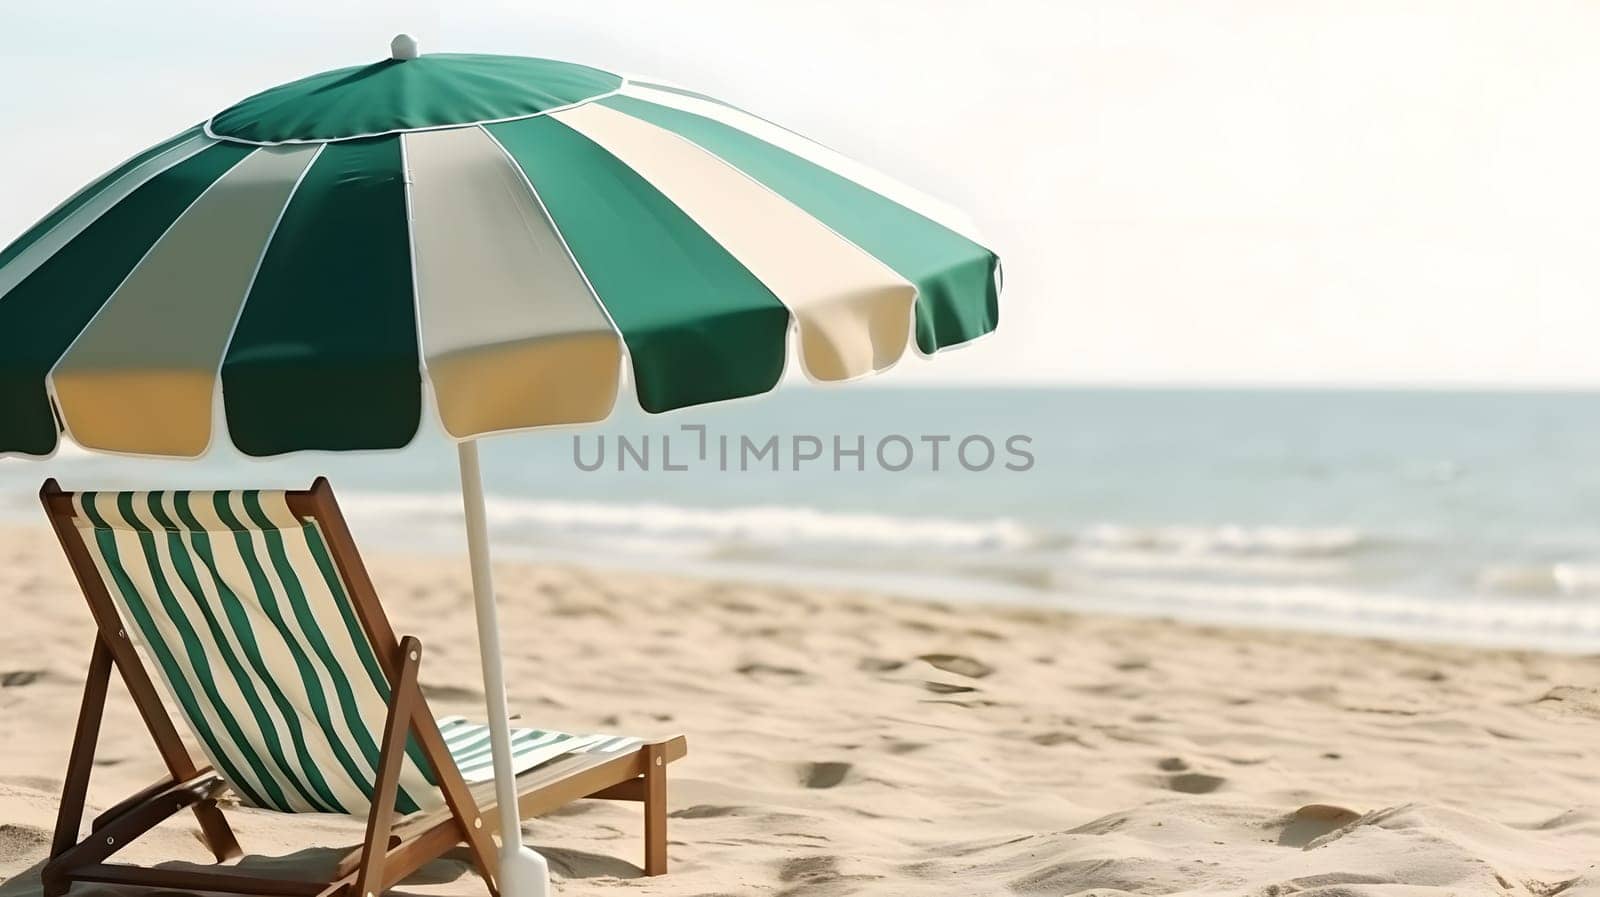 Beach umbrella with chair on the sand beach - summer vacation theme header, neural network generated art by z1b